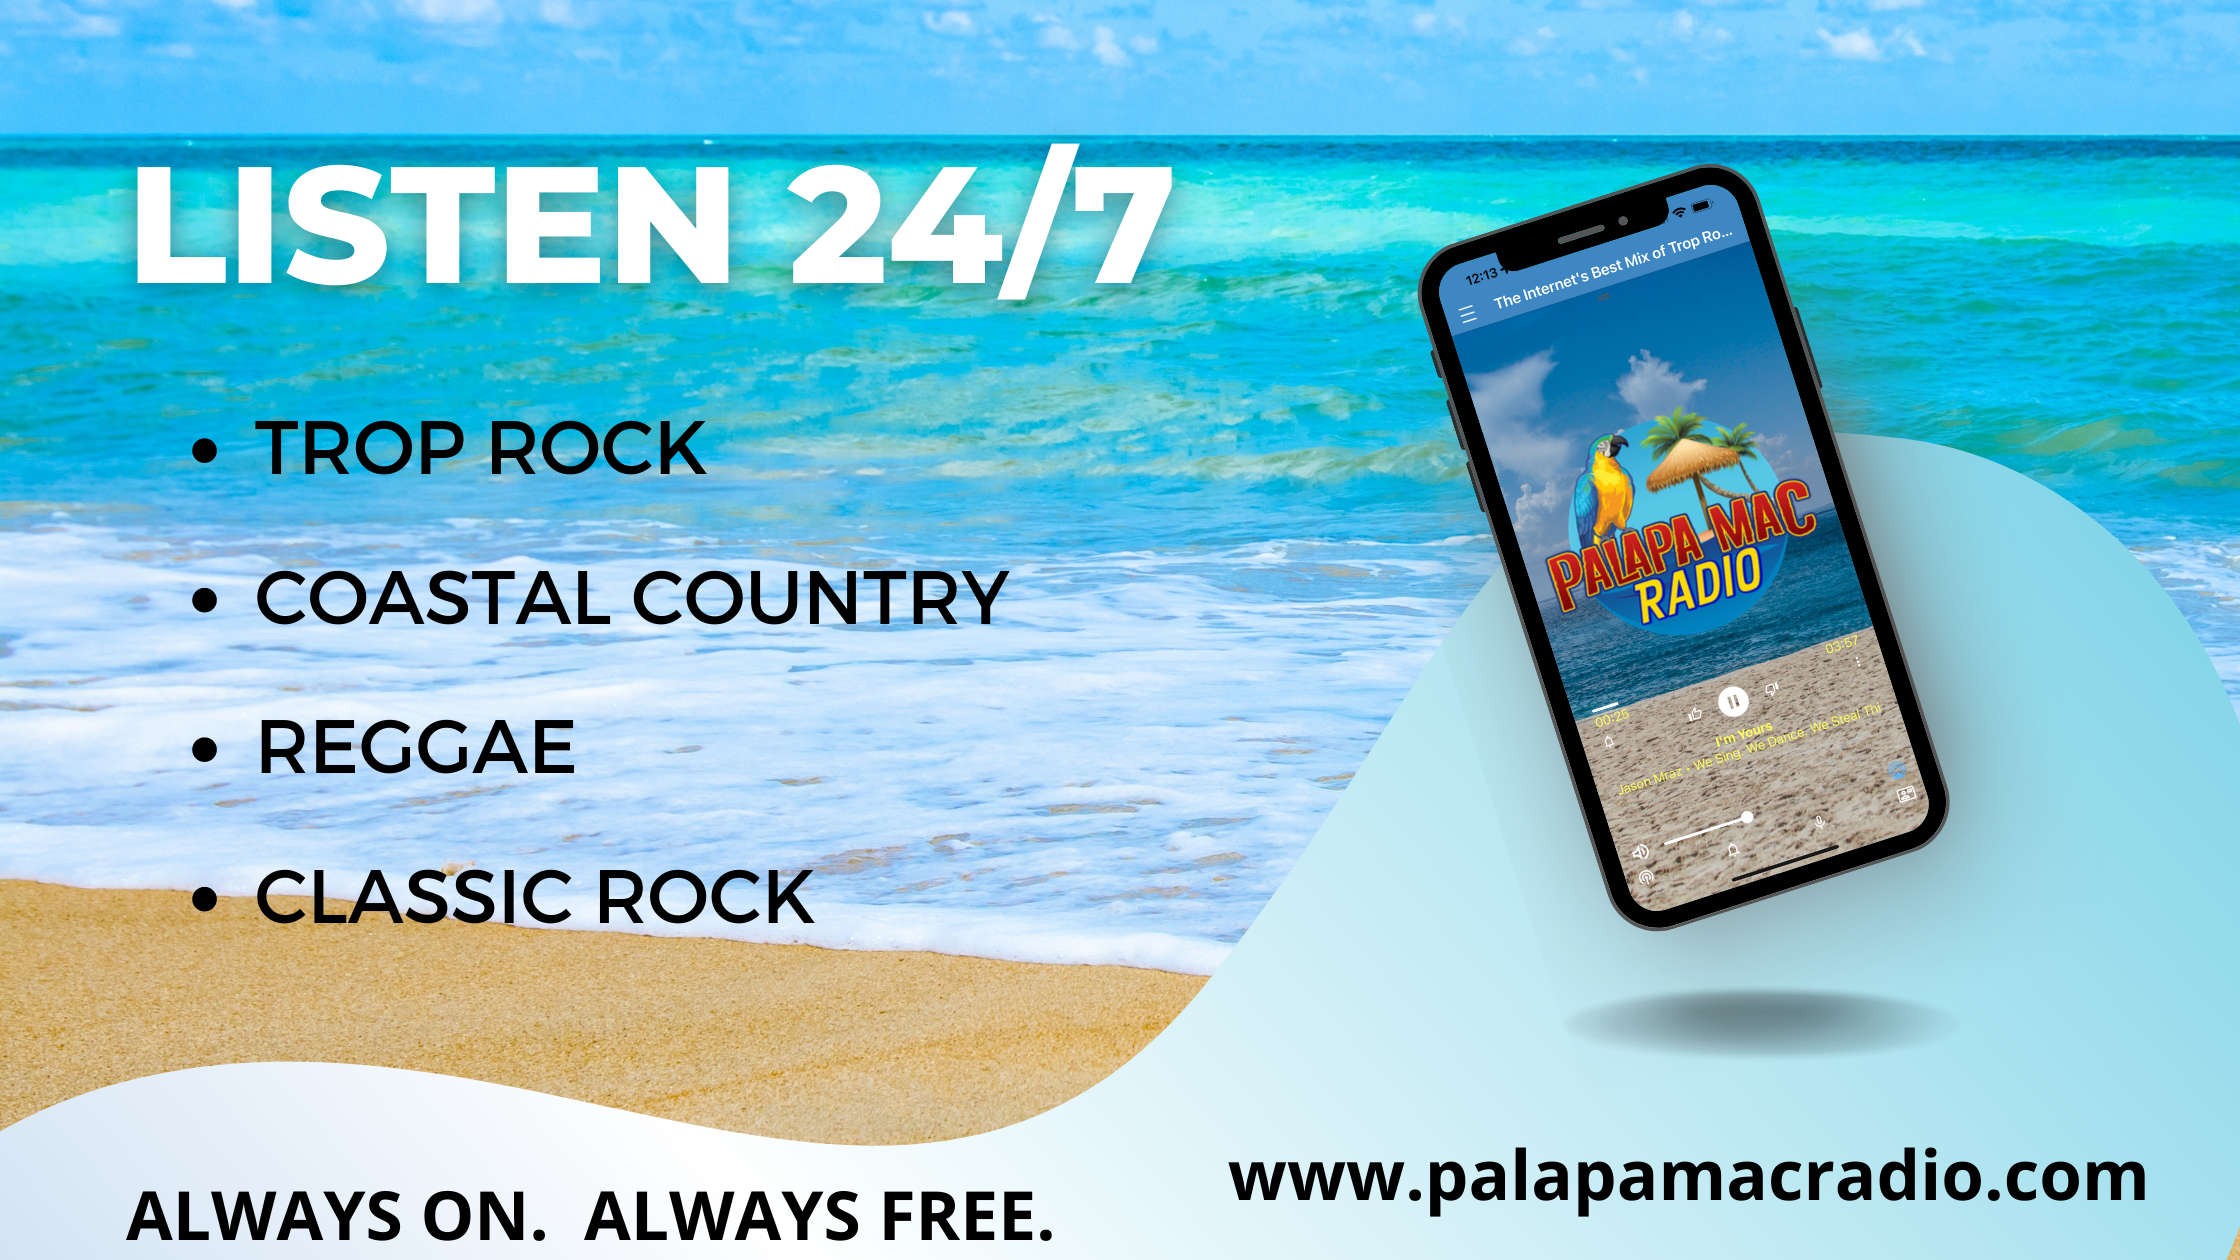 Palapa Mac Radio- Trop Rock, Coastal Country, Reggae and Classic Rock music mix for your ultimate escape.